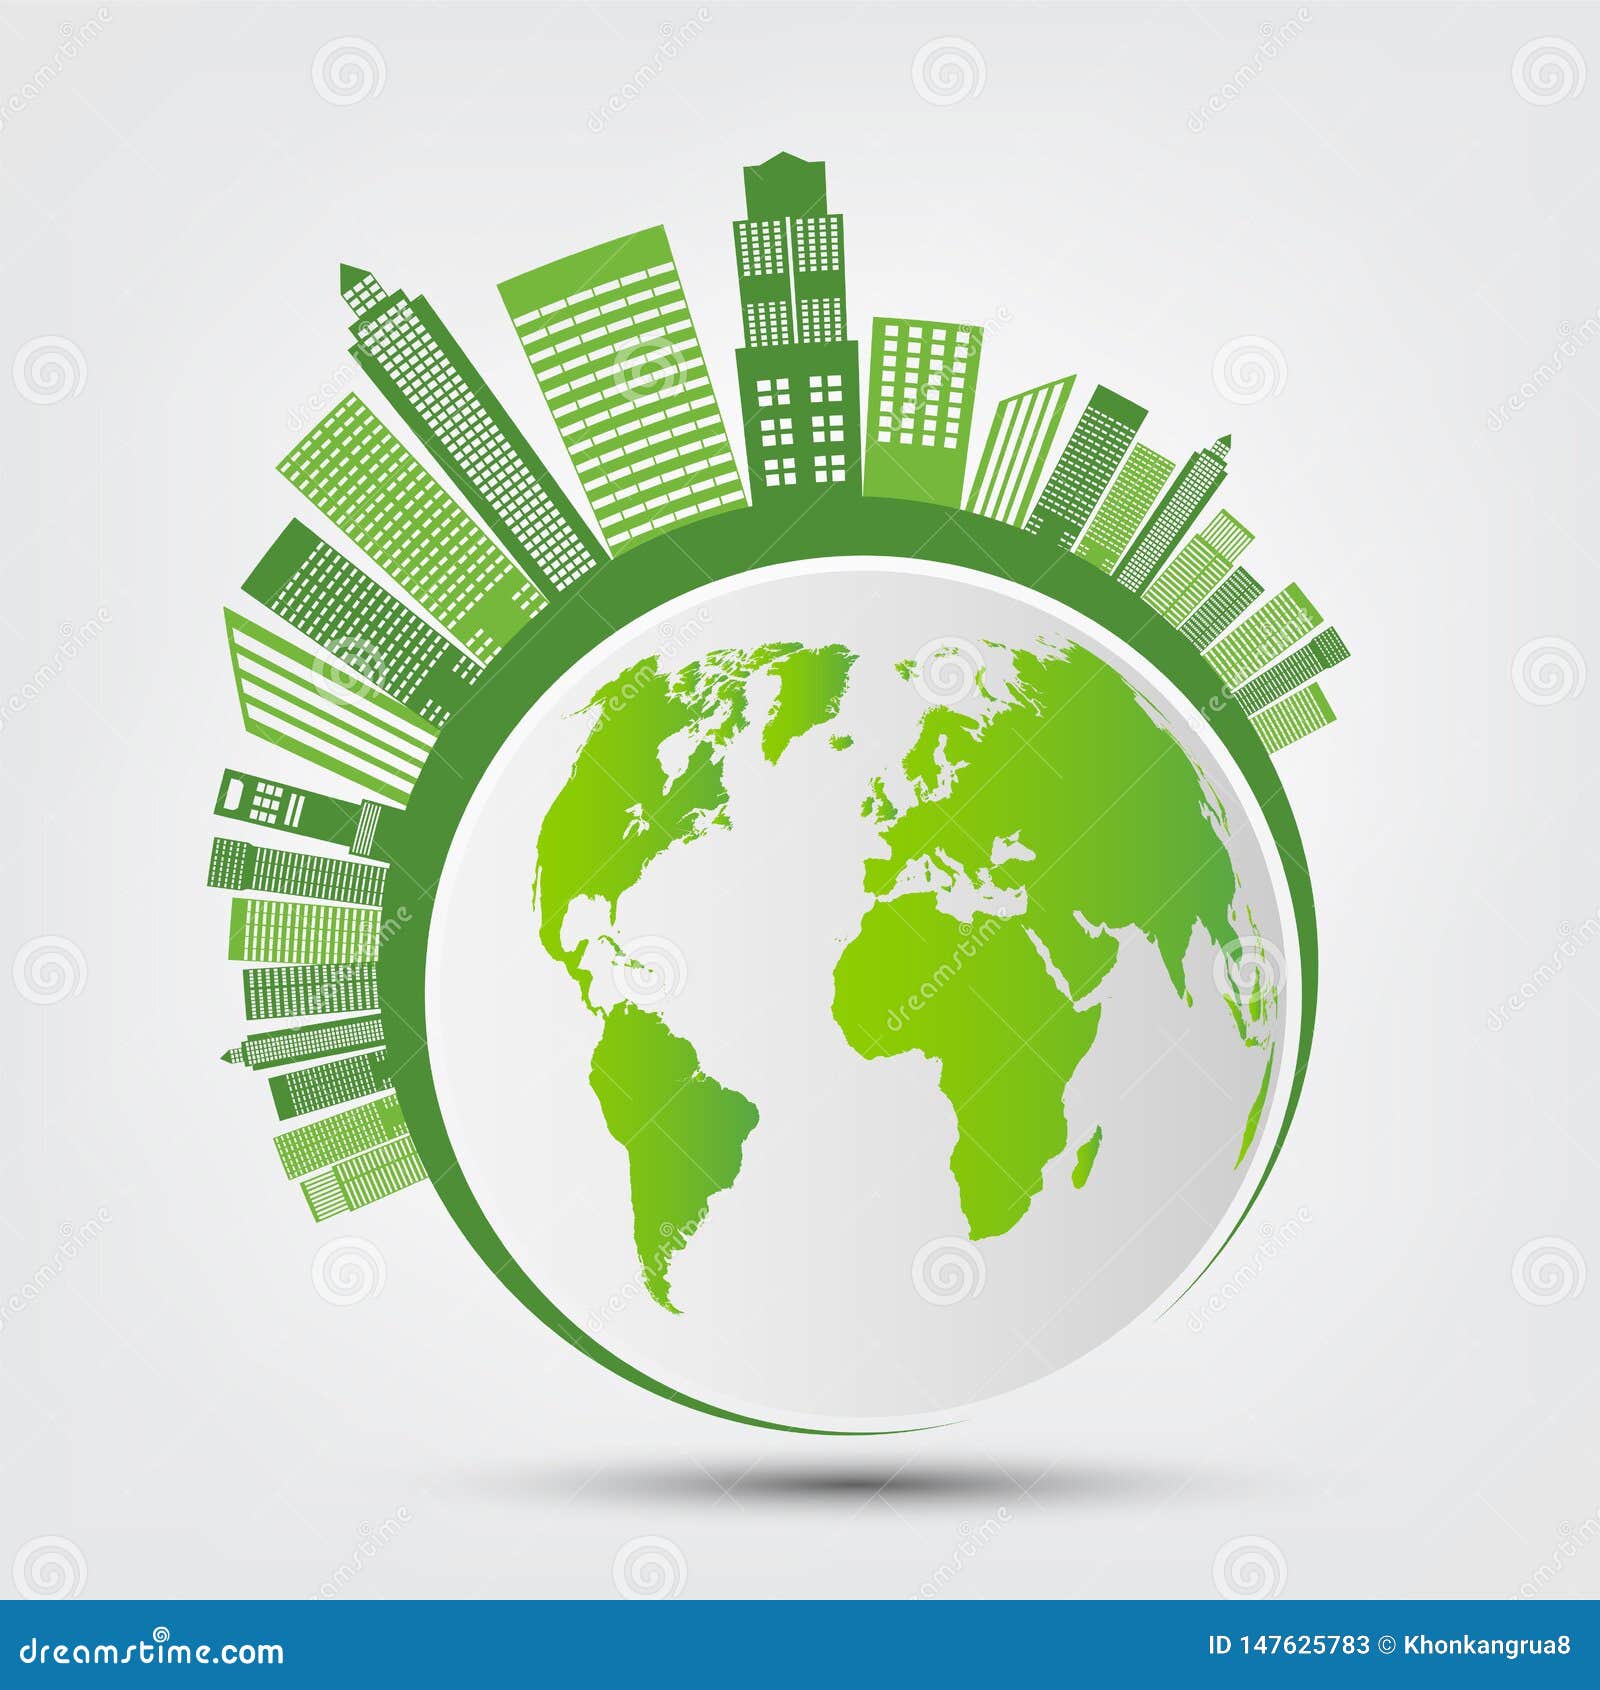 ecology and environmental concept,earth  with green leaves around cities help the world with eco-friendly ideas,